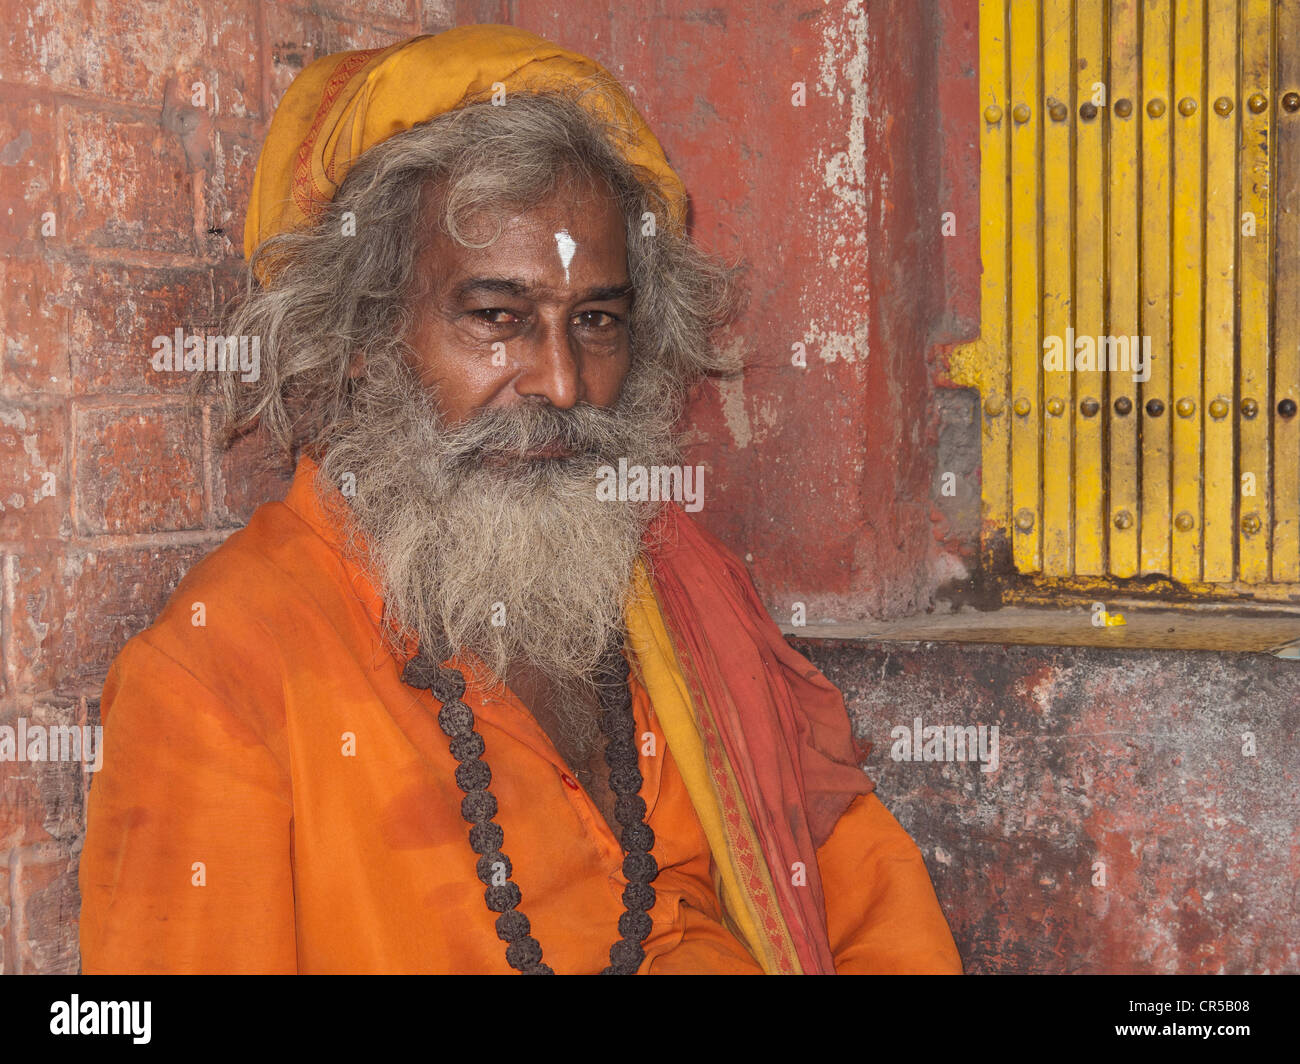 A Sadhu, holy man of India, sitting in front of a little shrine in the streets of New Delhi Stock Photo